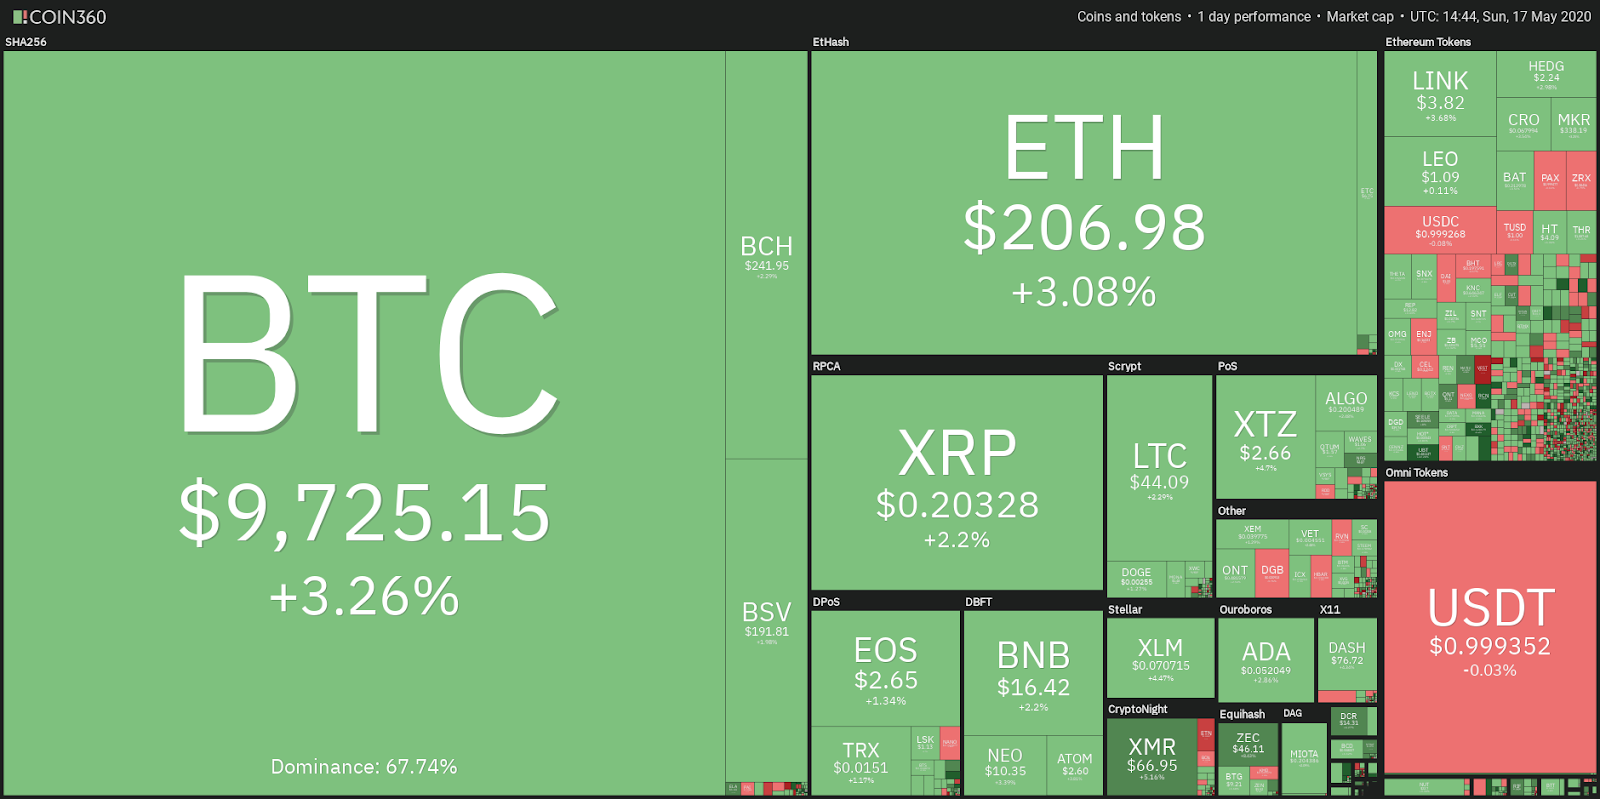 Crypto market data daily view. Source: Coin360